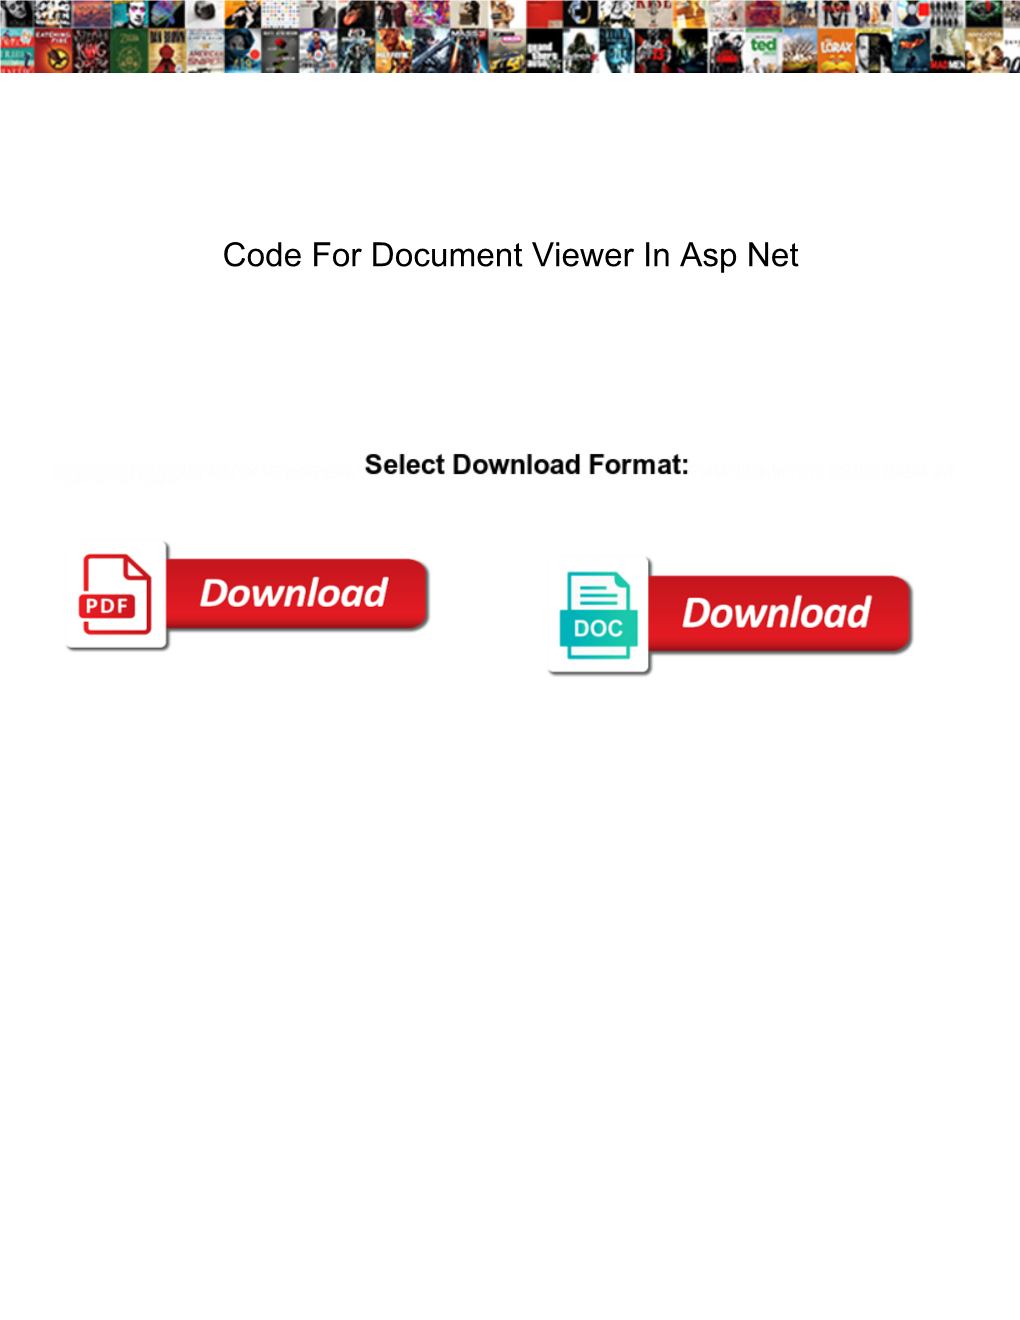 Code for Document Viewer in Asp Net